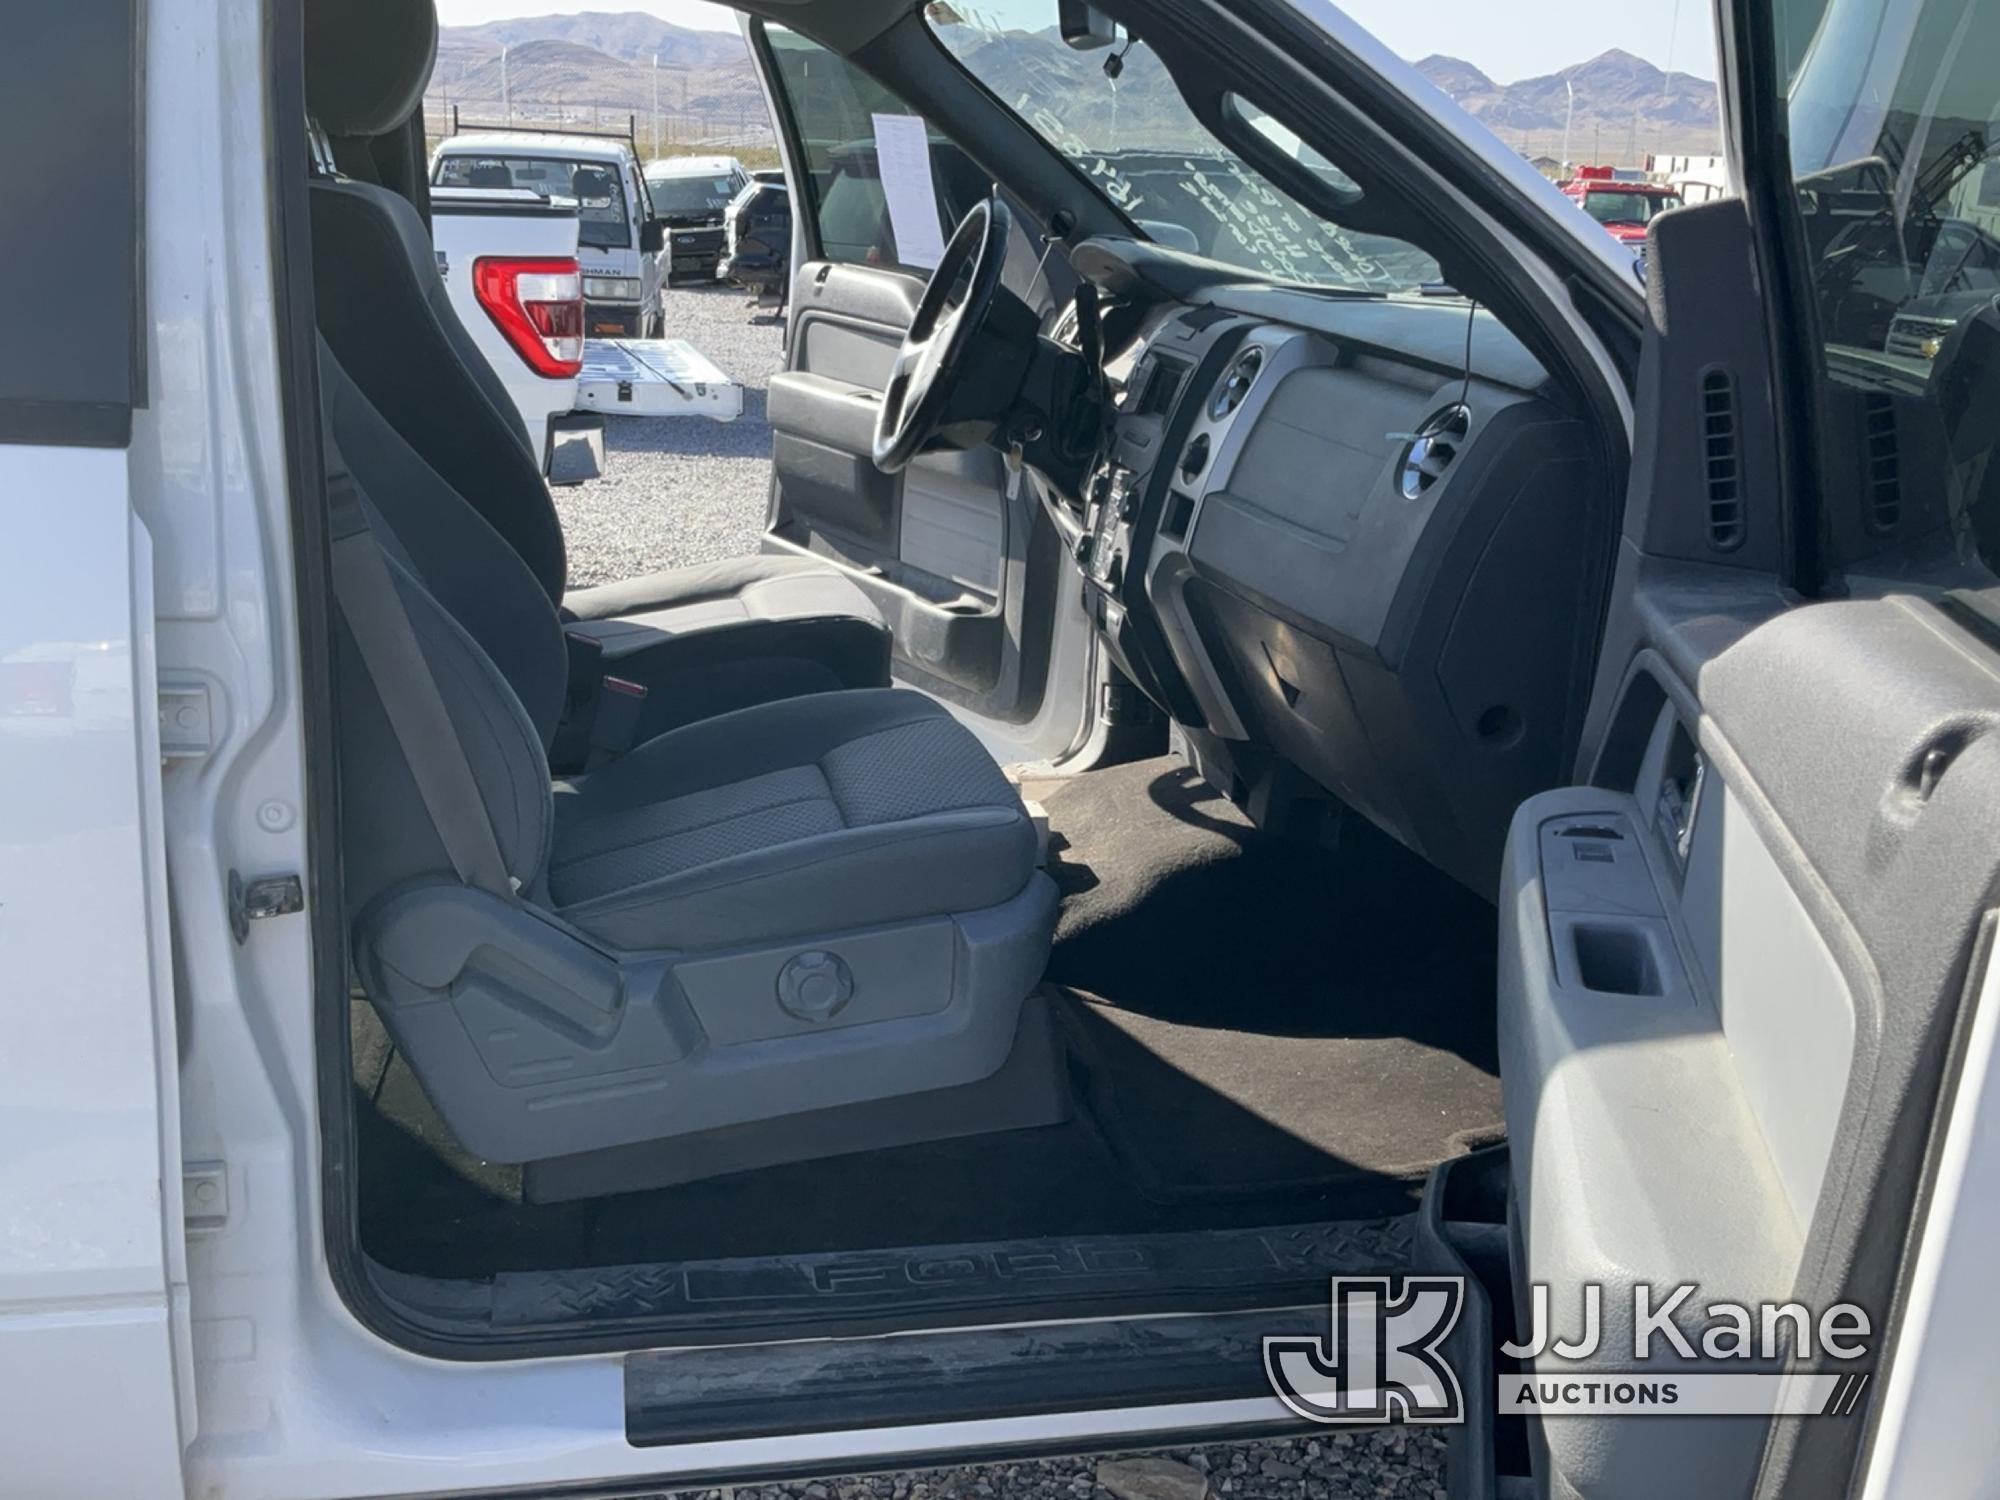 (Las Vegas, NV) 2014 Ford F150 4x4 Towed In, Body Damage, No Console, Rear end Or Transmission Noise